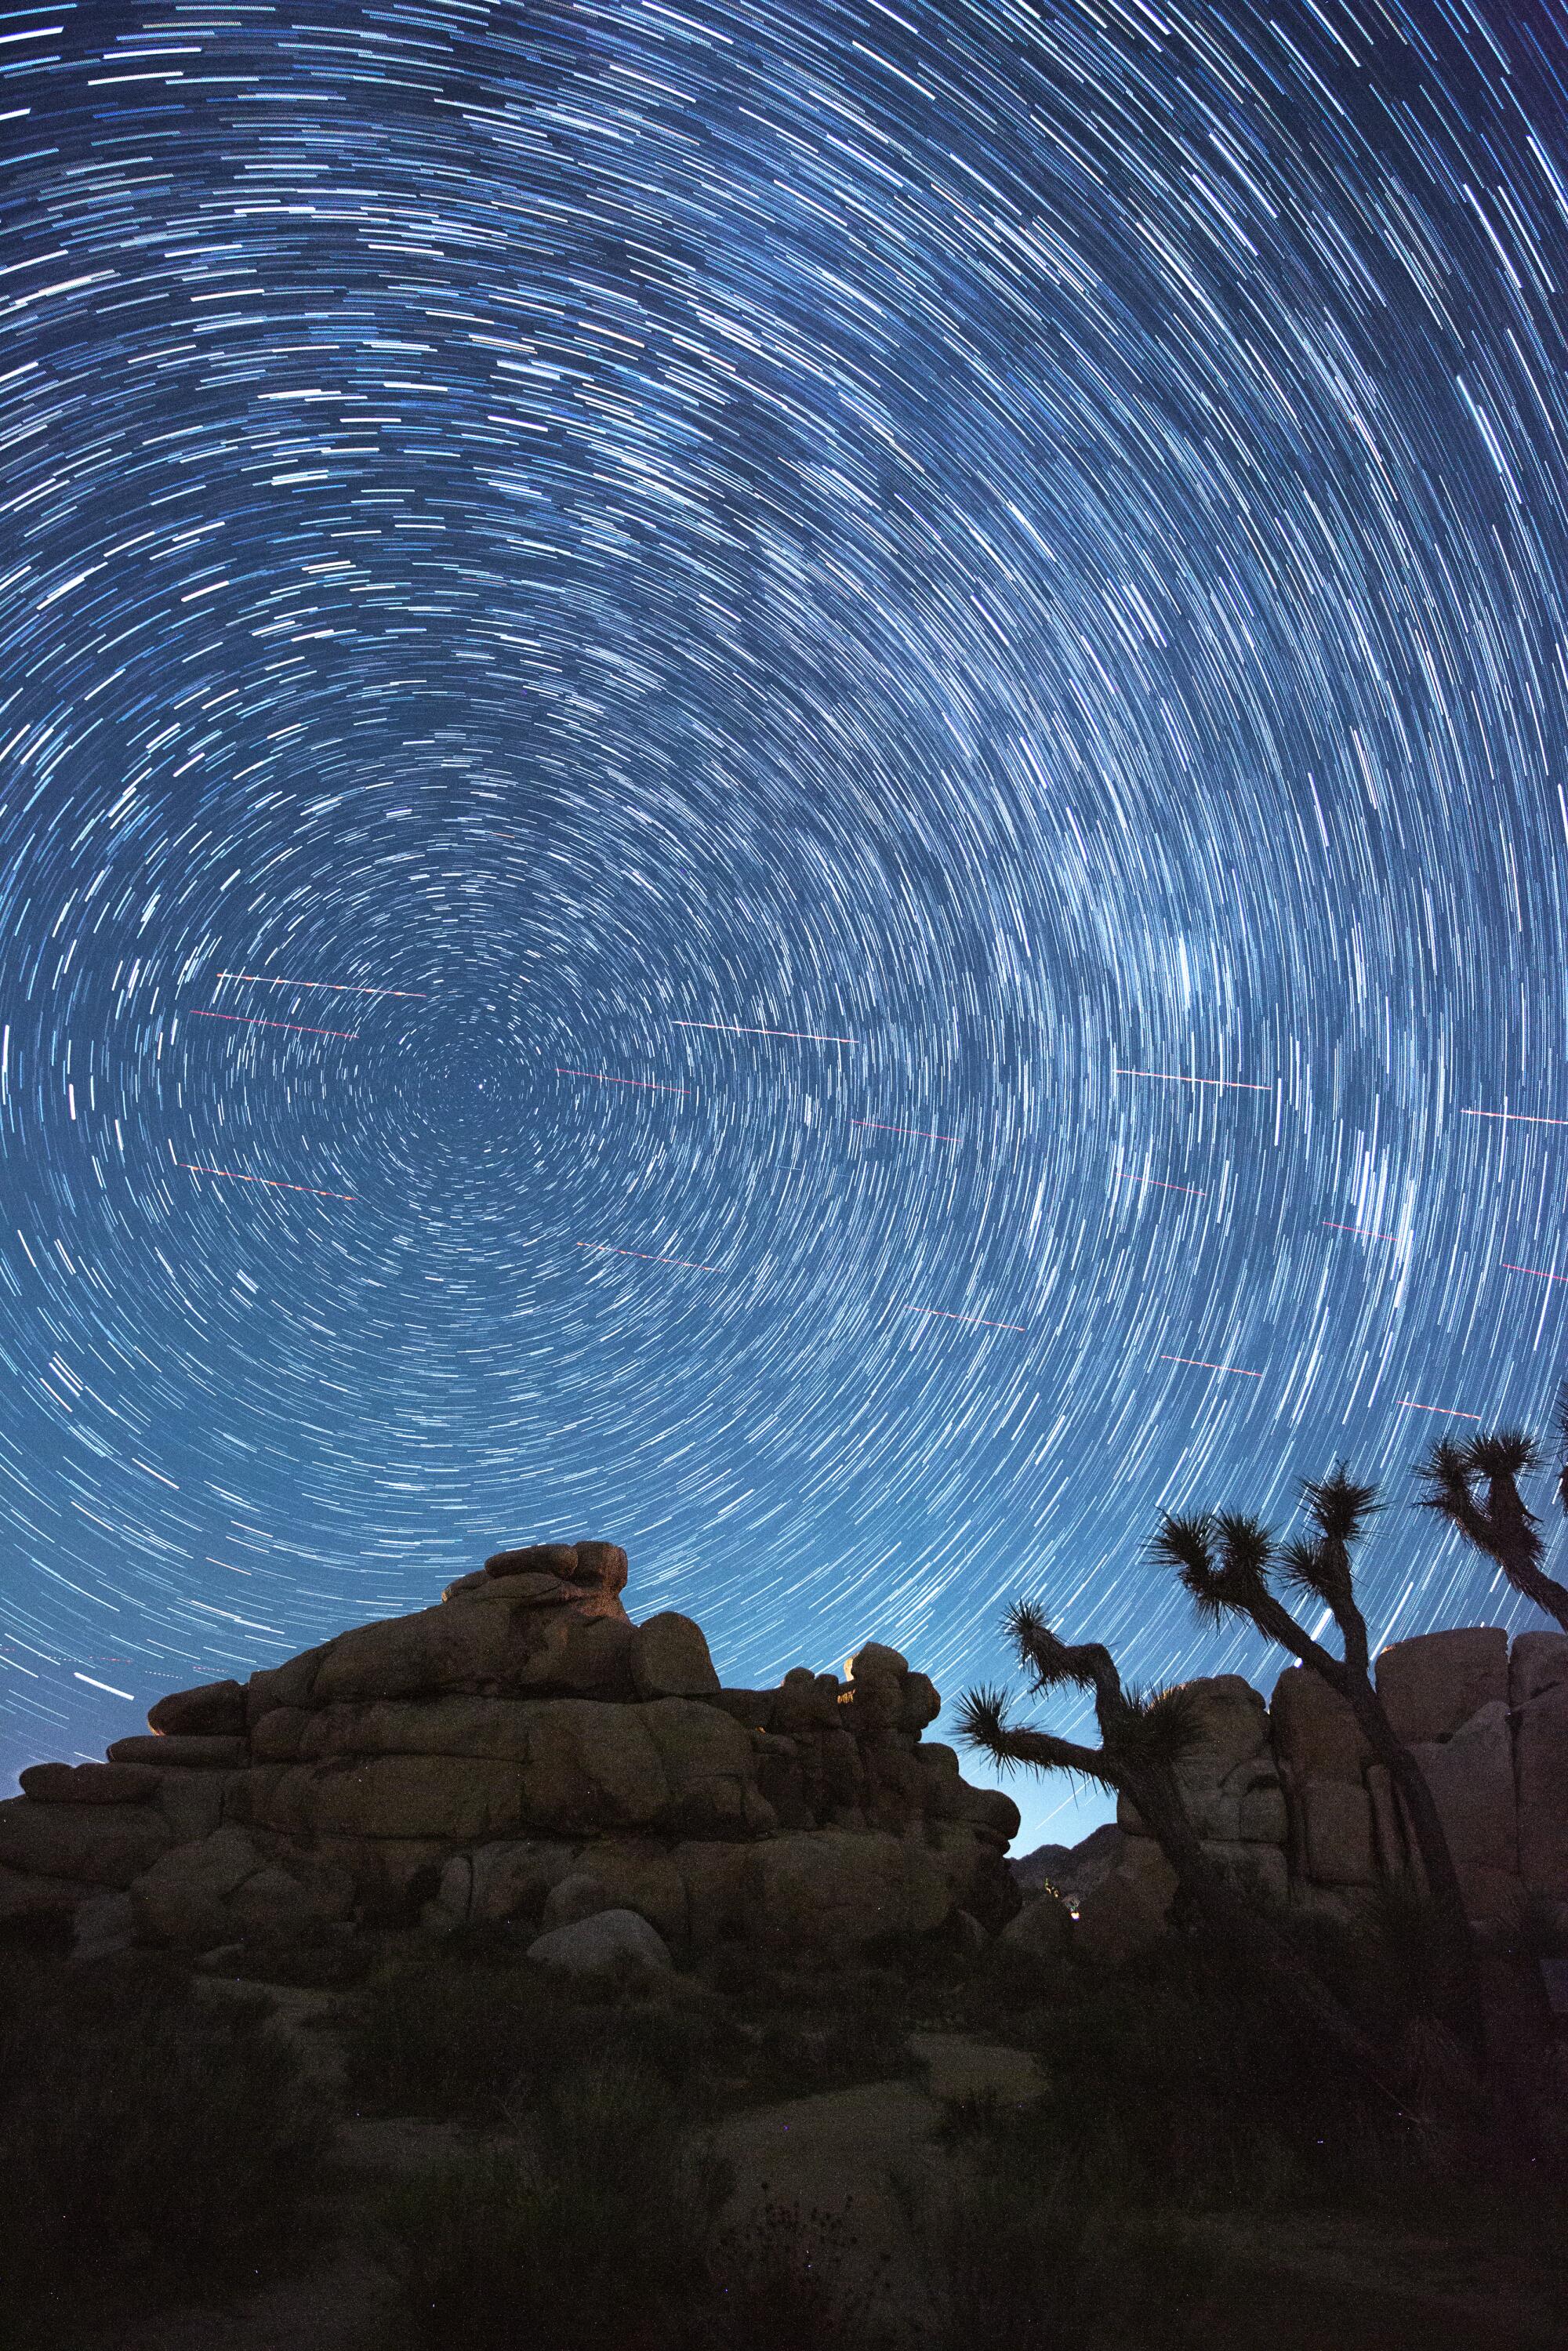 A composite of star photos, made in Joshua Tree during a dark sky photography workshop.